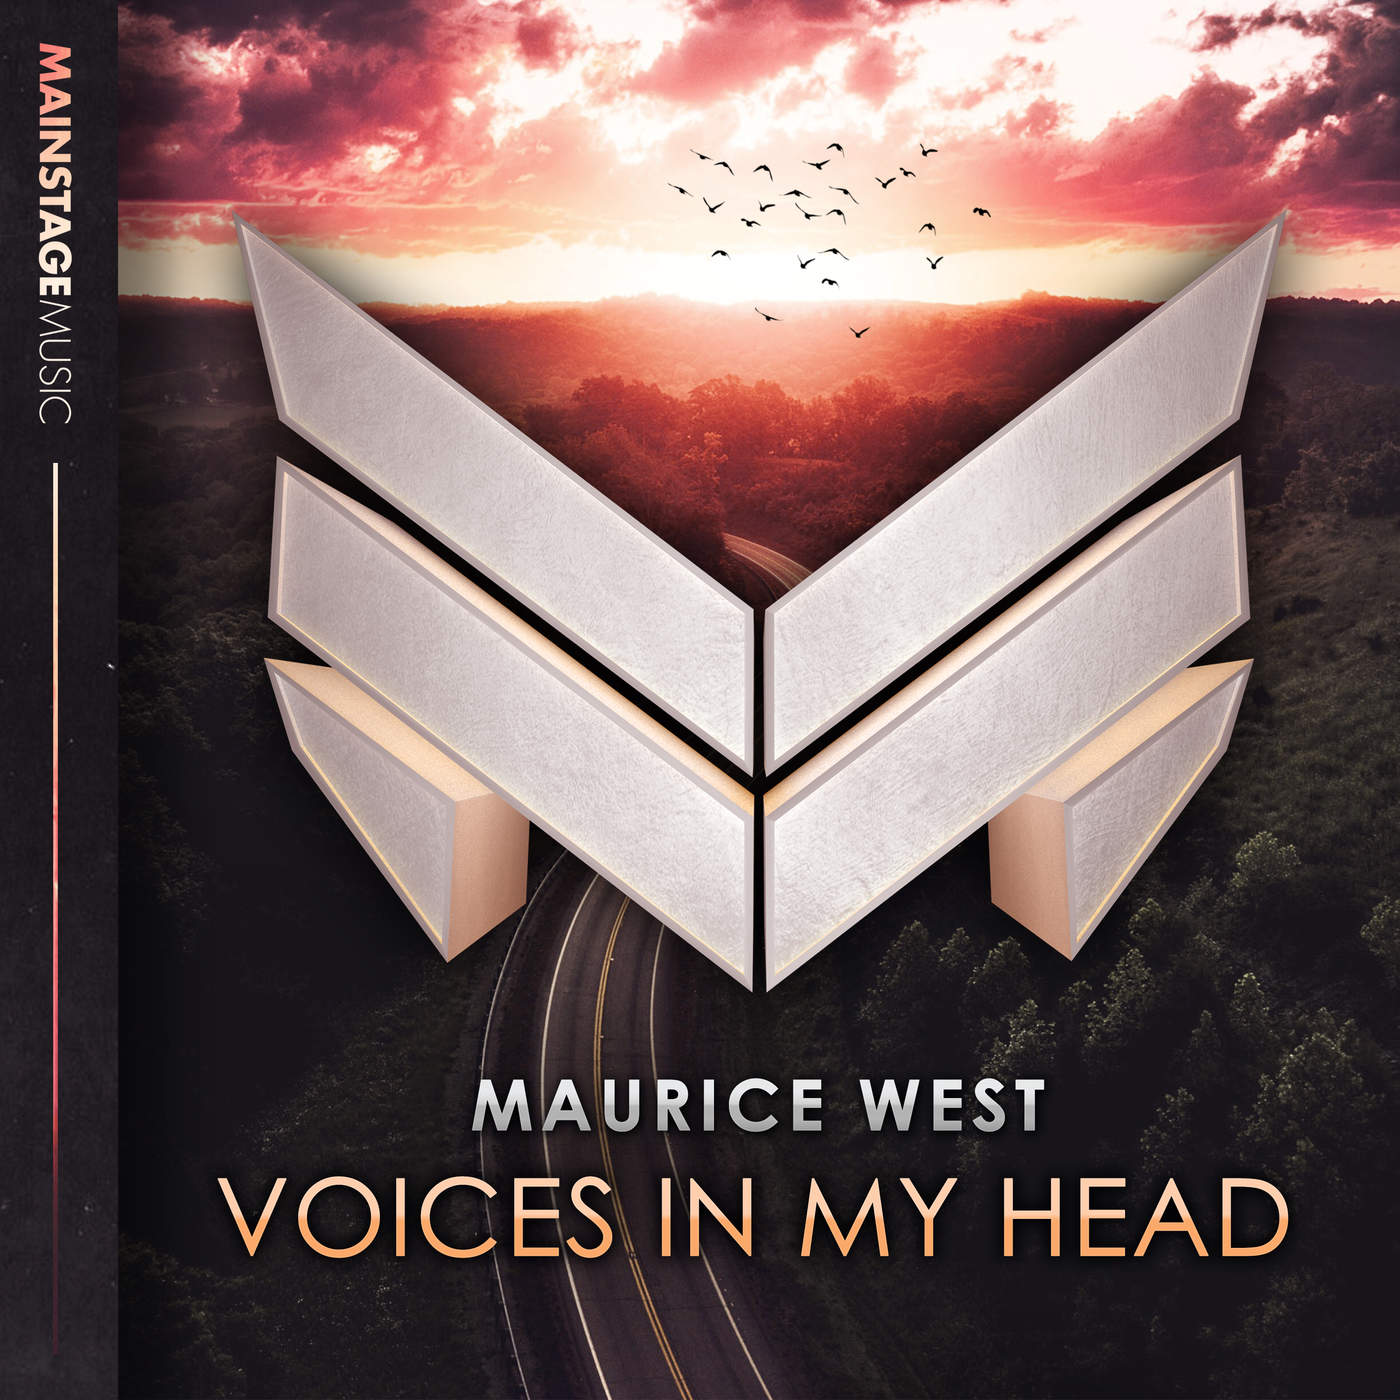 Maurice West - Voices In My Head картинки